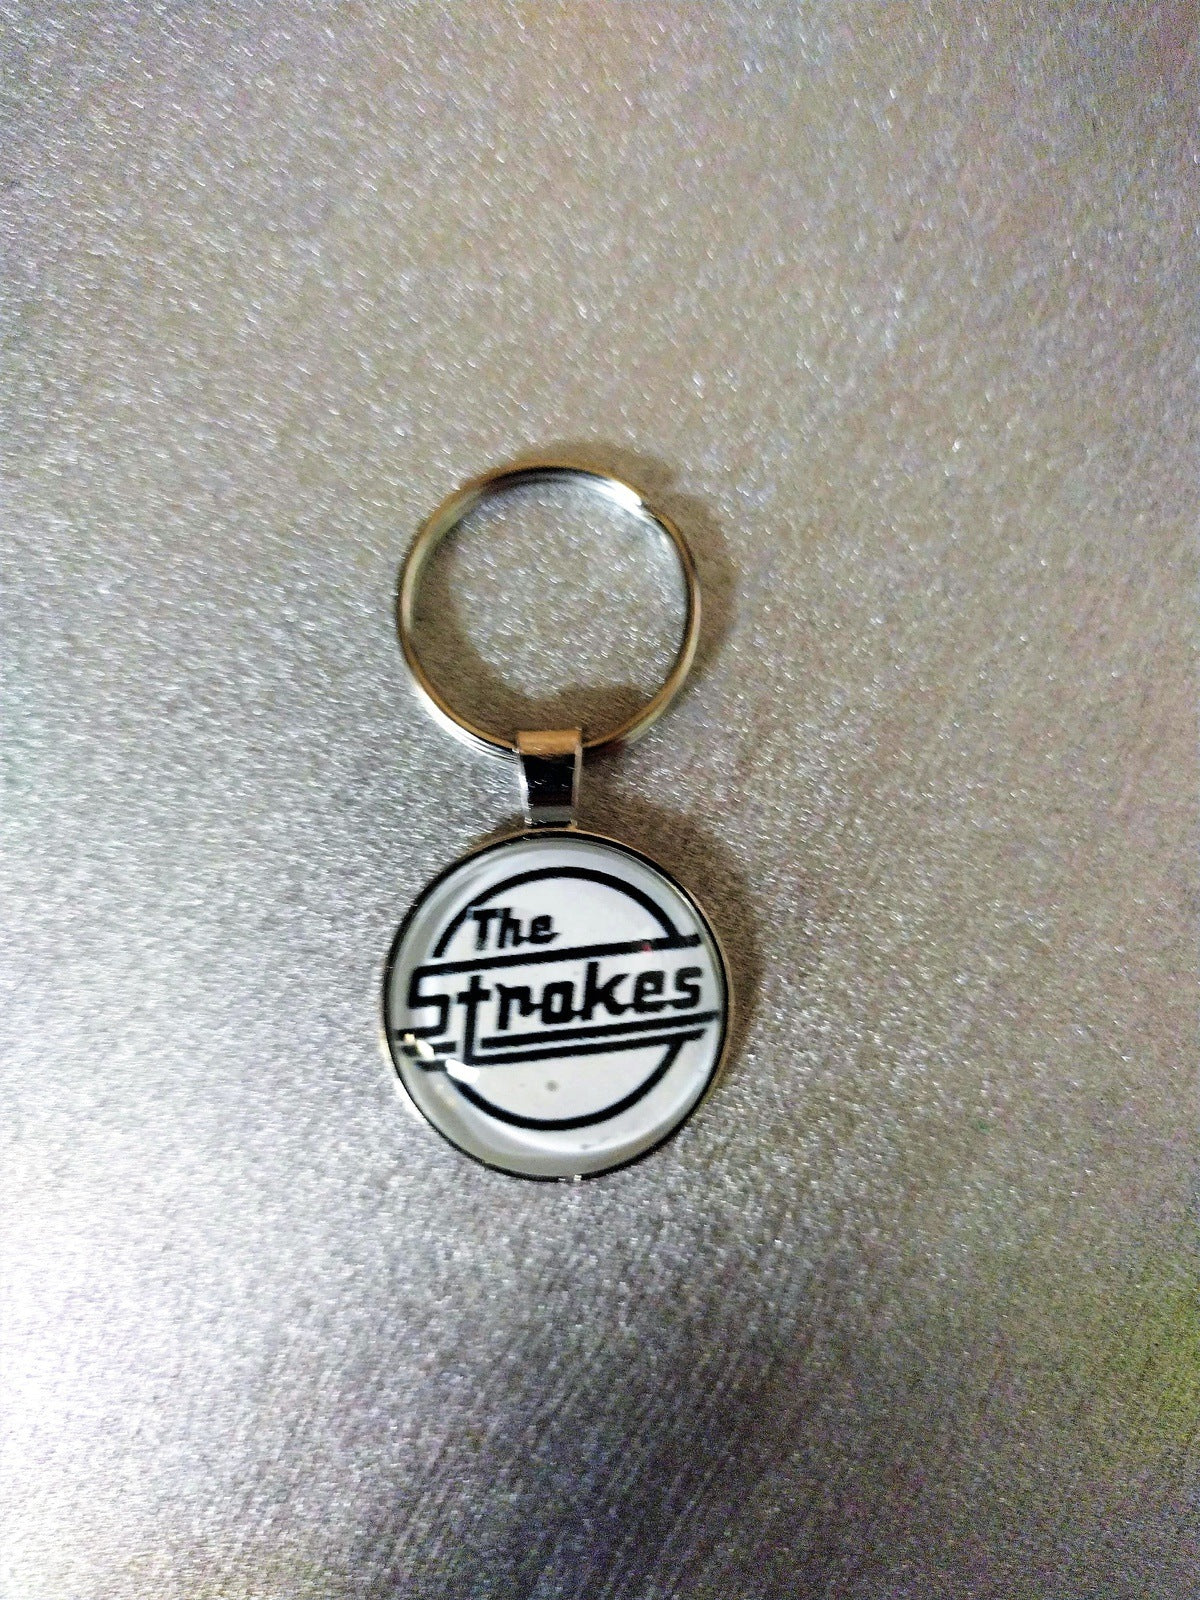 The Strokes 1 Inch Keychain